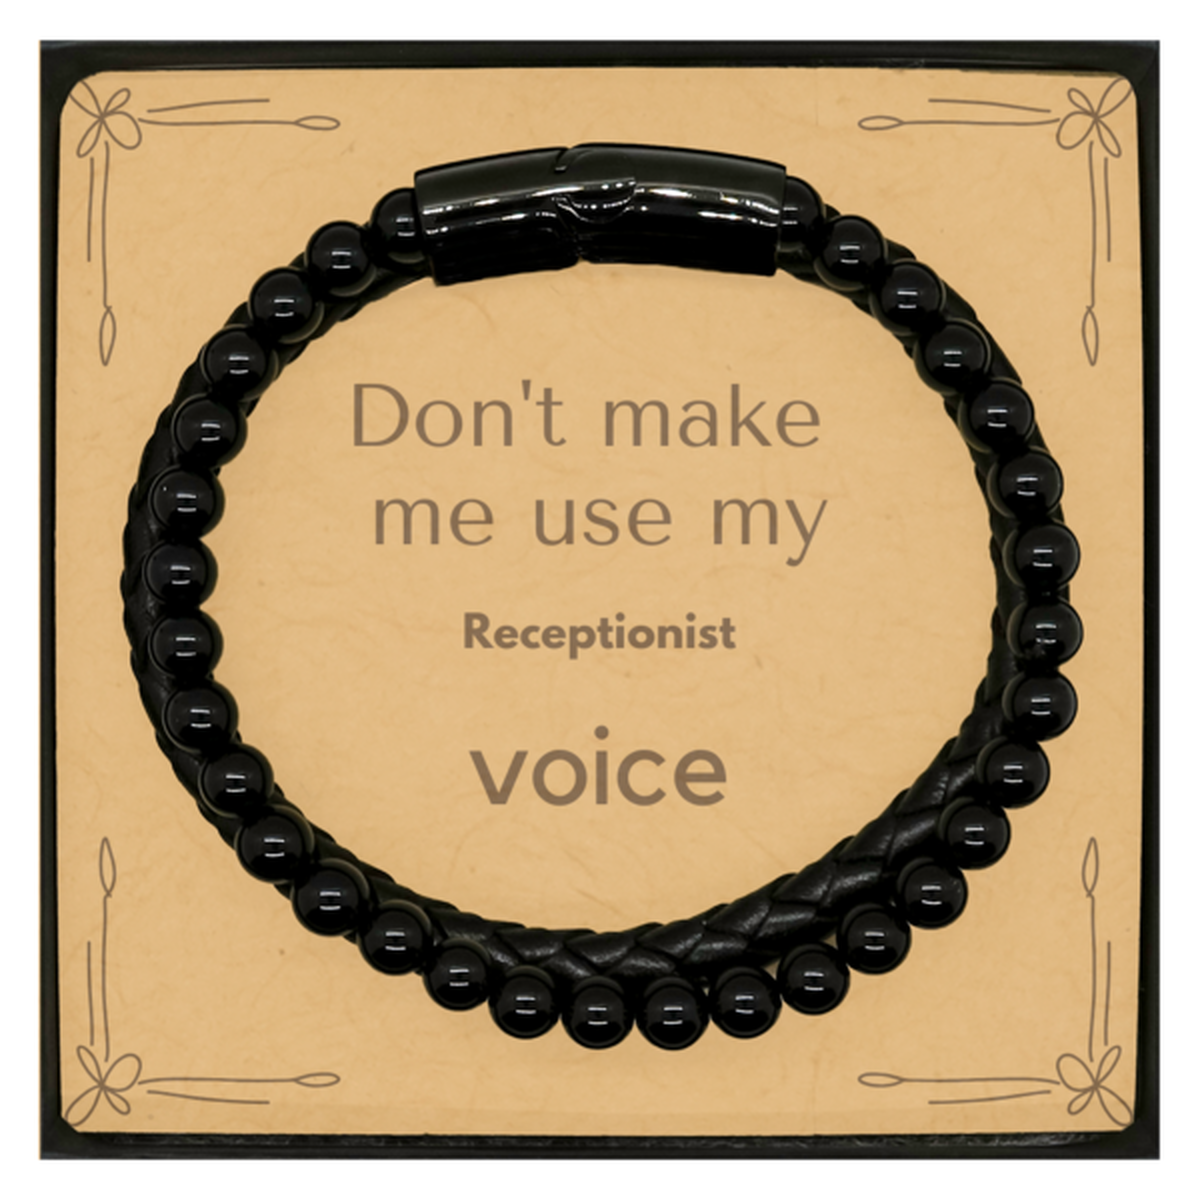 Don't make me use my Receptionist voice, Sarcasm Receptionist Card Gifts, Christmas Receptionist Stone Leather Bracelets Birthday Unique Gifts For Receptionist Coworkers, Men, Women, Colleague, Friends